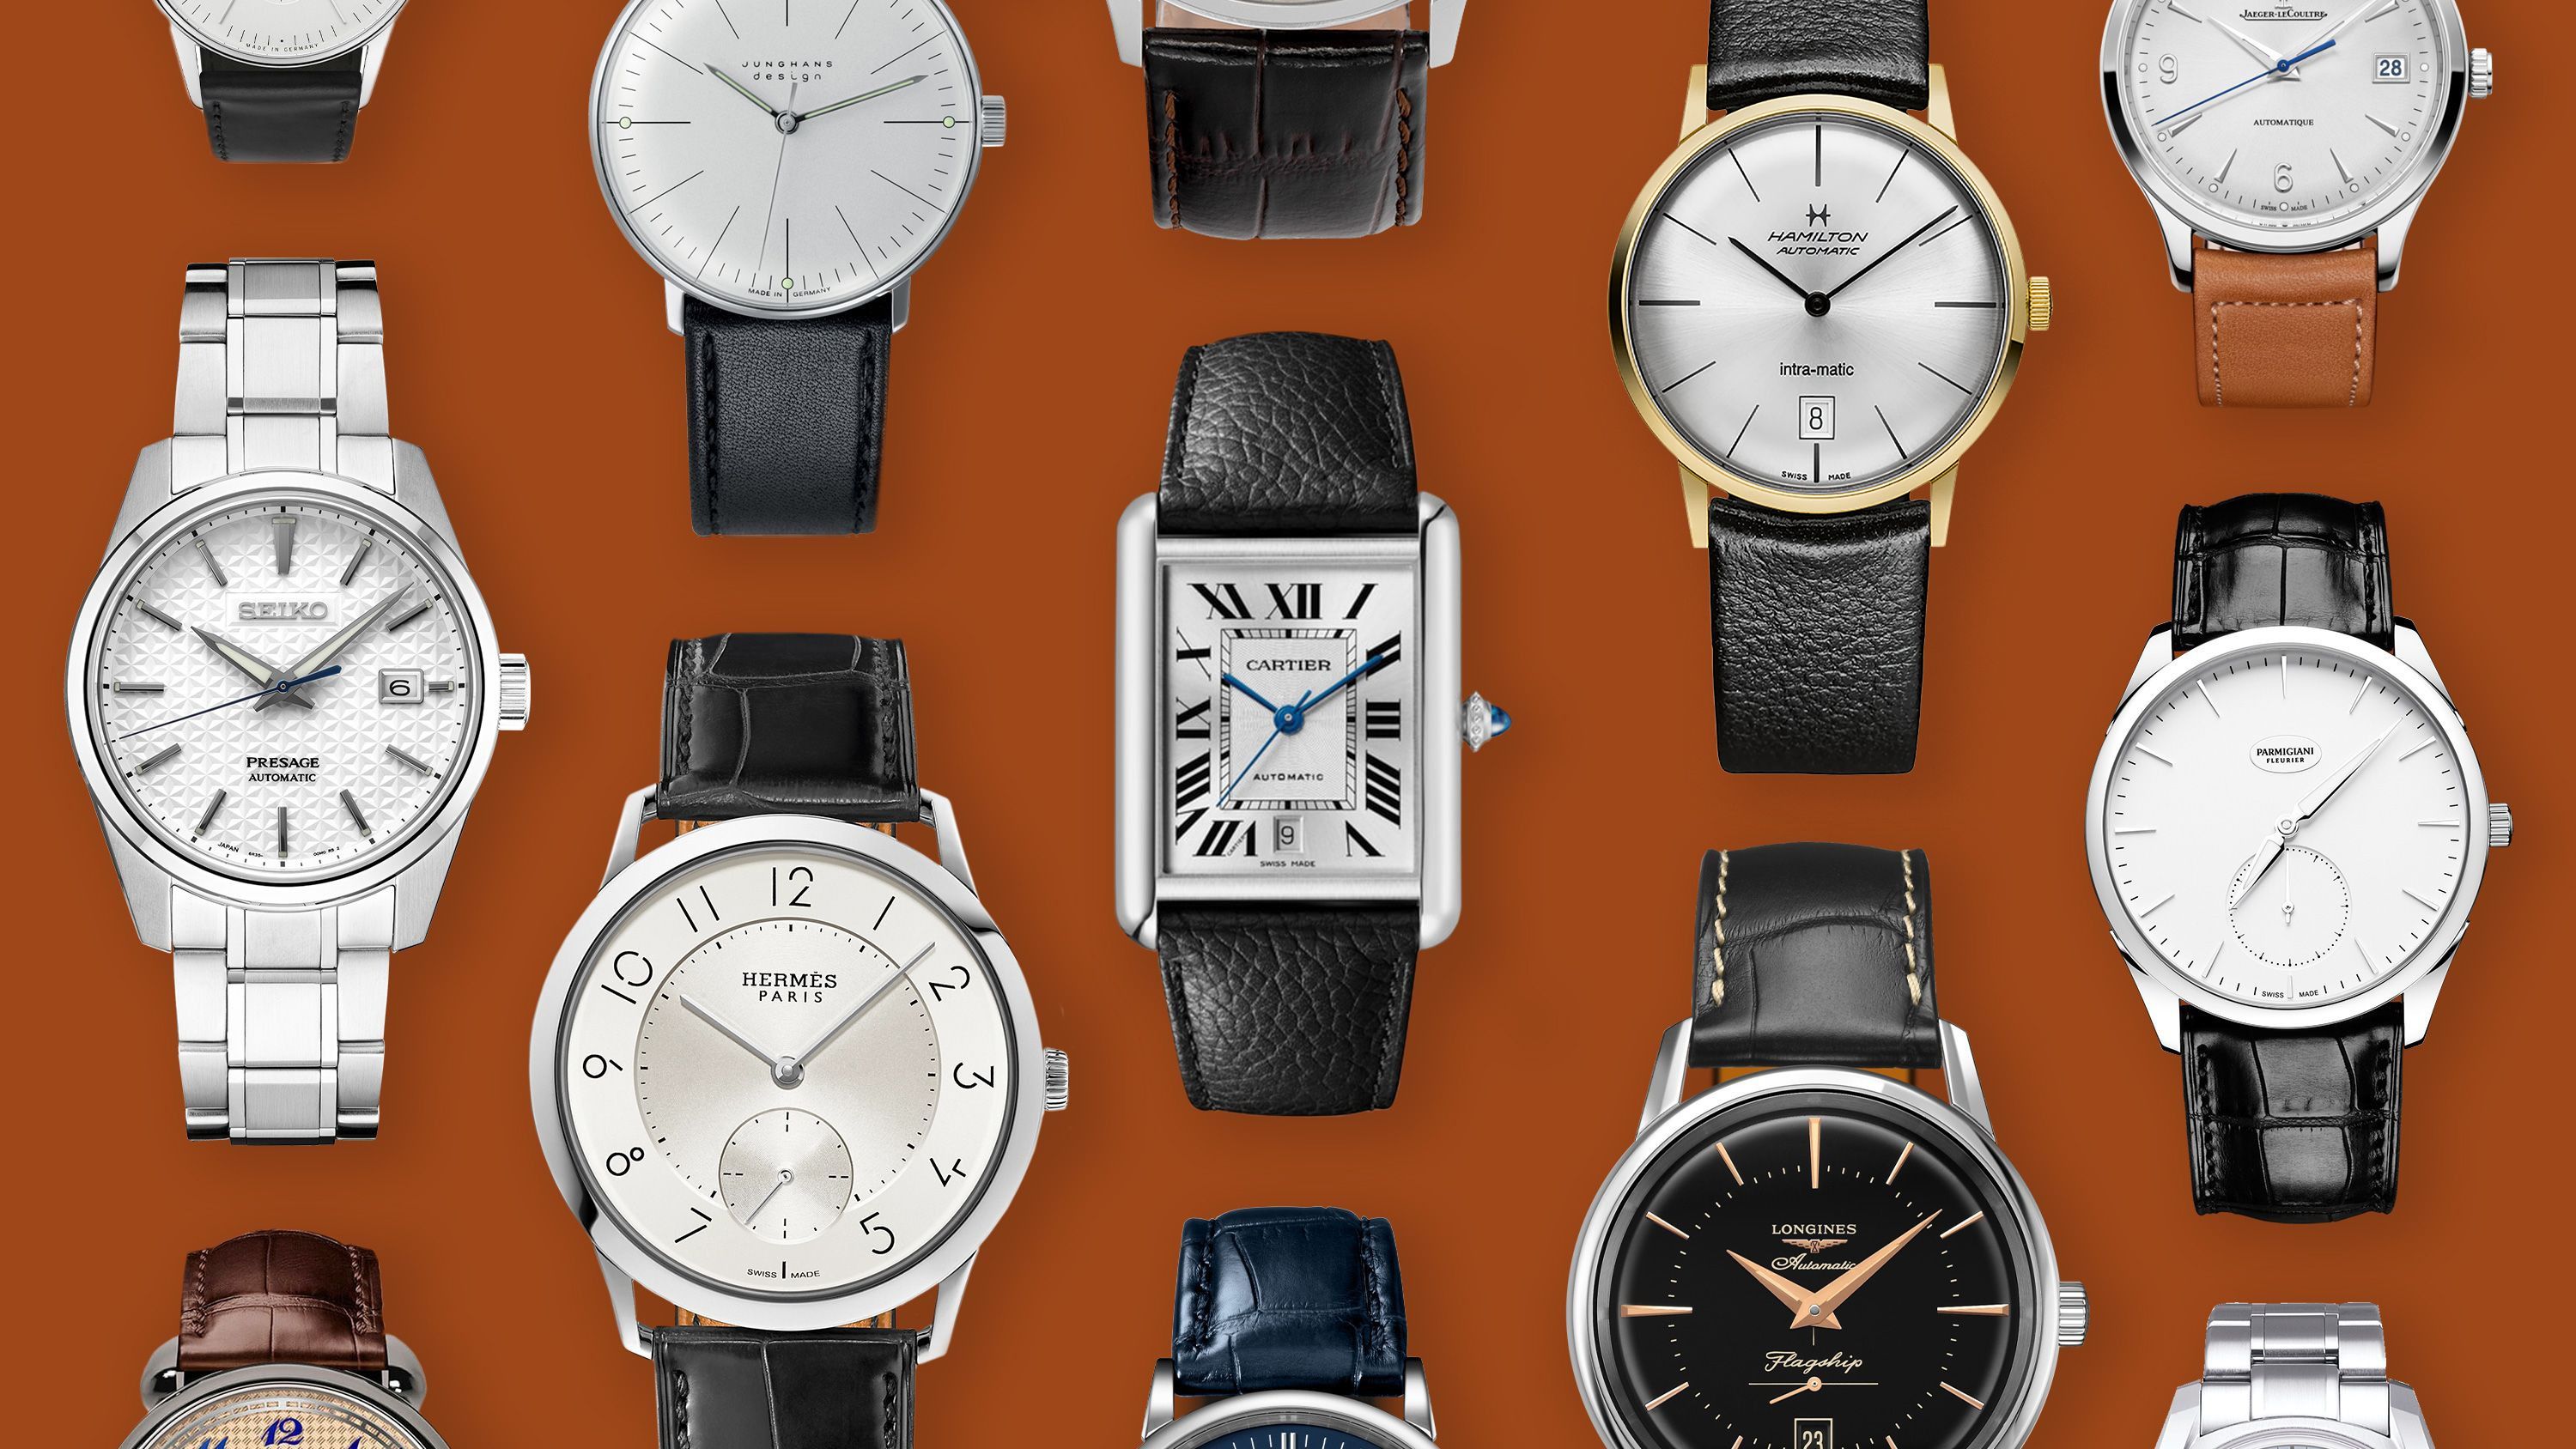 Watch With Sunburst Dial: An Elegant Timepiece for Fashion-Forward Individuals.